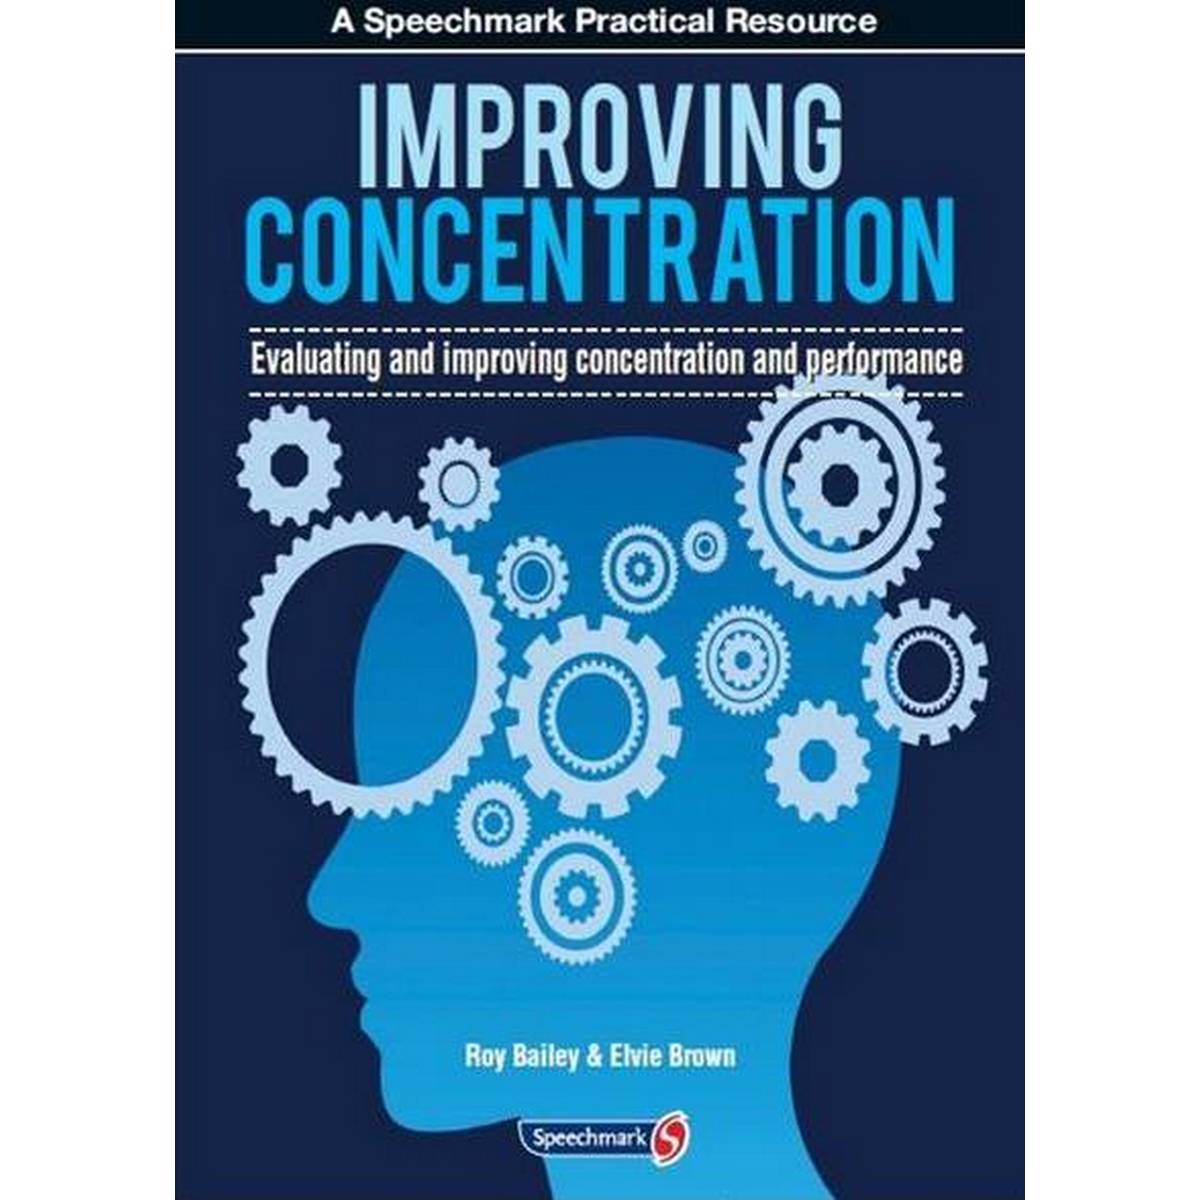 Improving Concentration: Evaluating and Improving Concentration and Performance